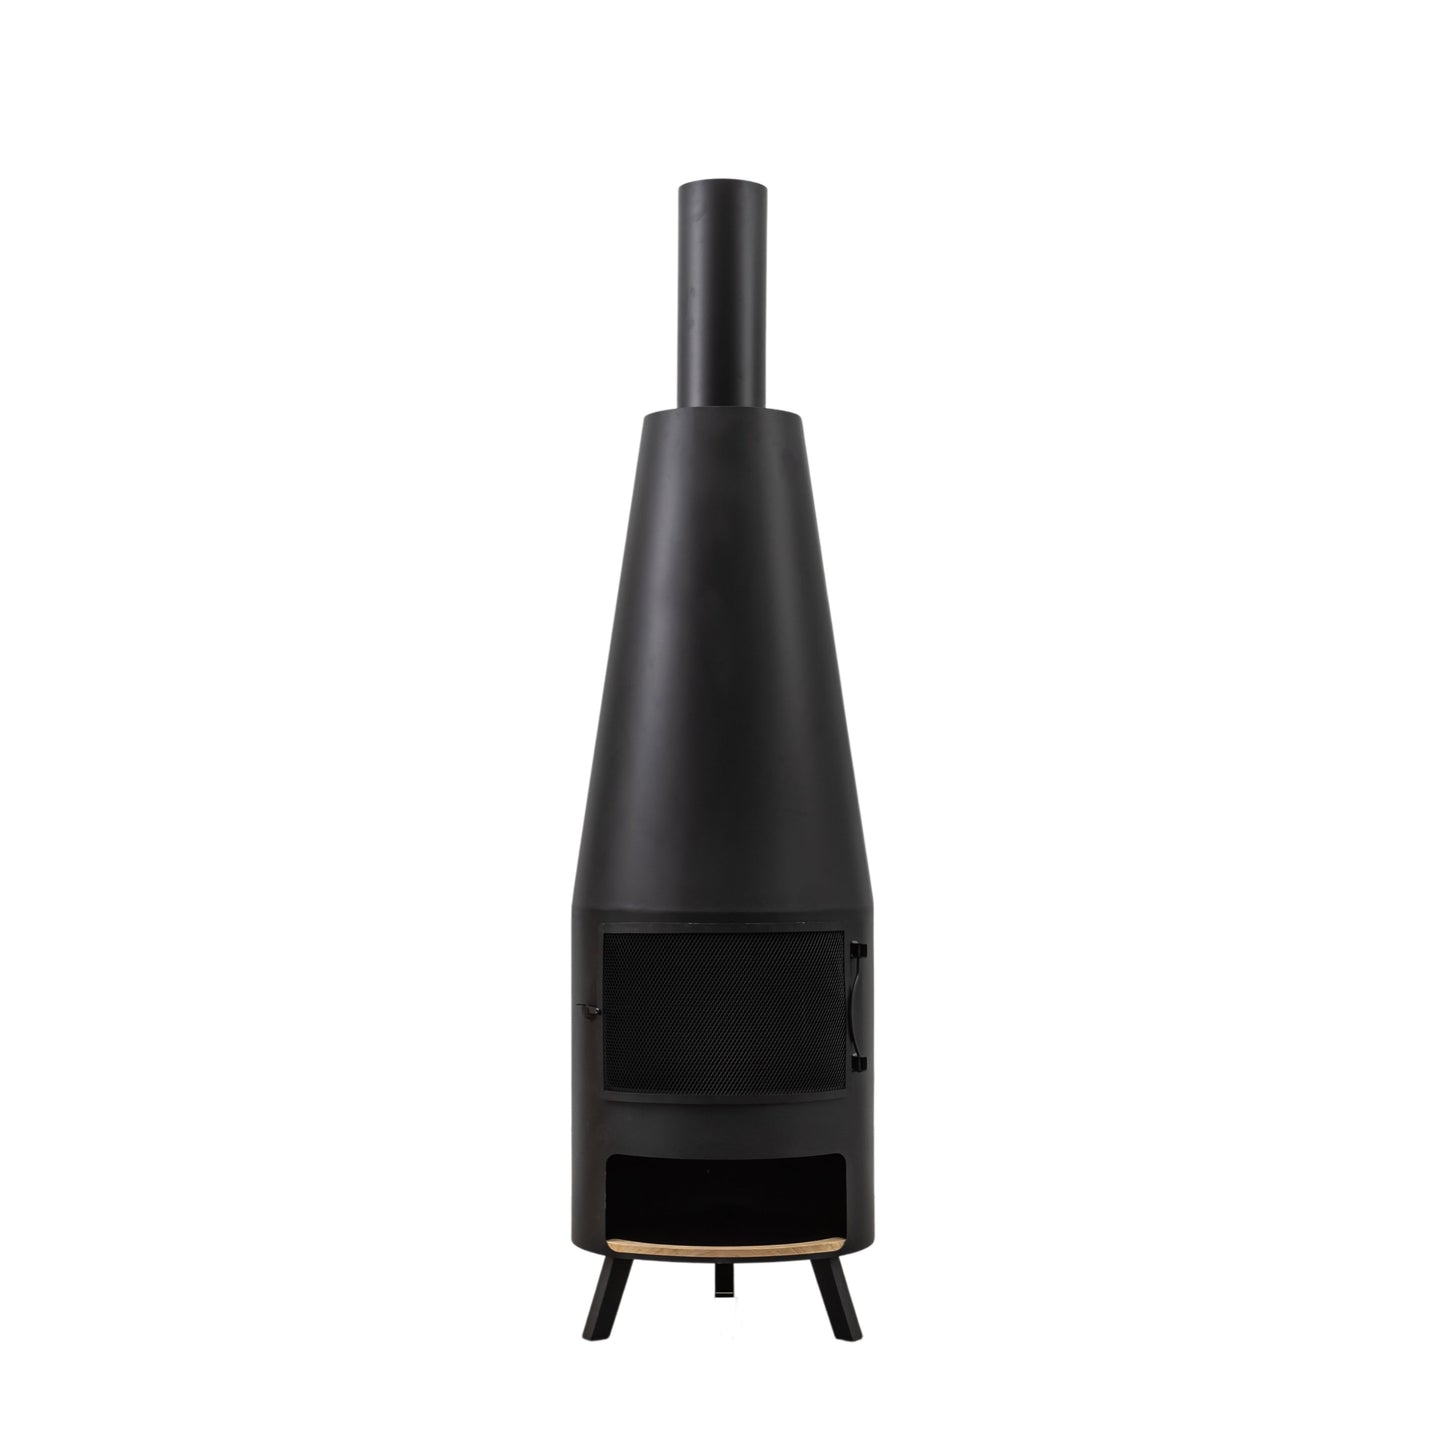 A Monkleigh Chiminea with Pizza Shelf 500x500x1865mm for interior decor purposes from Kikiathome.co.uk on a white background.